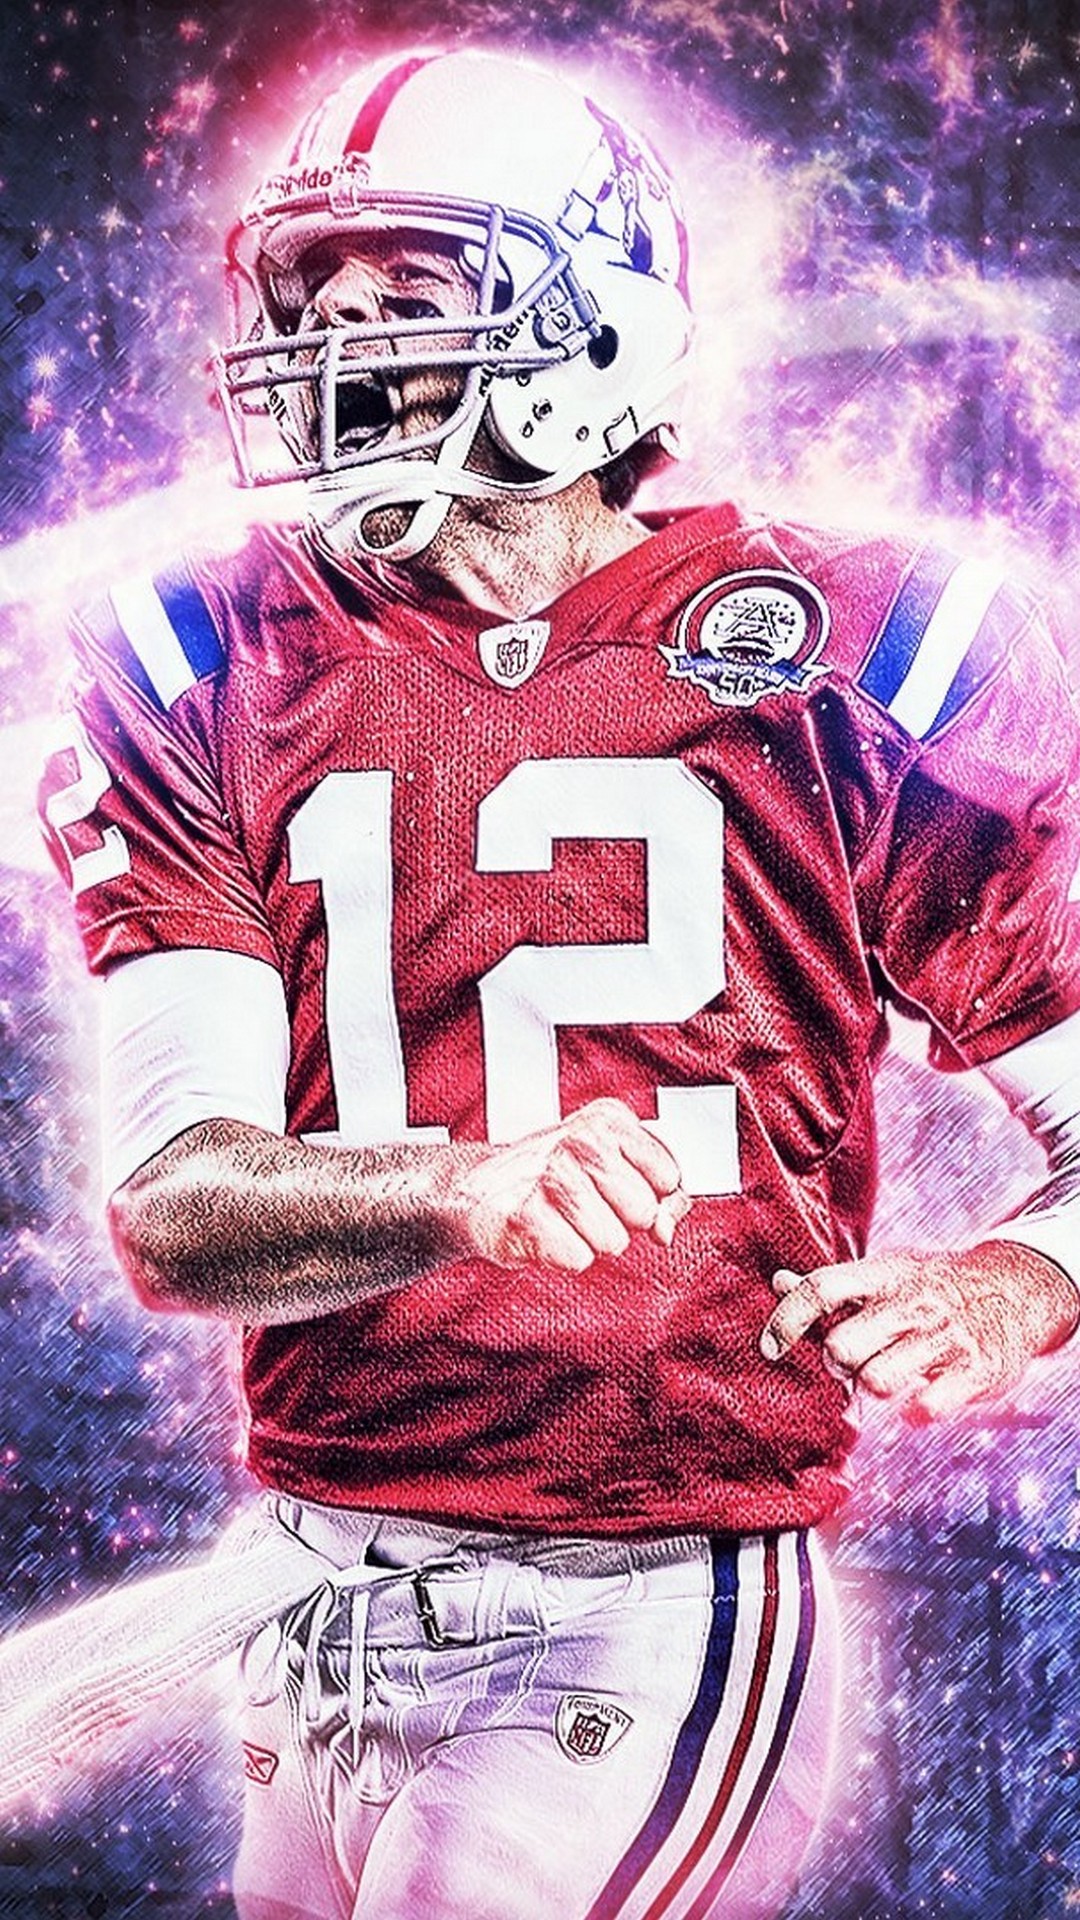 iPhone 8 Wallpaper Tom Brady Goat With high-resolution 1080X1920 pixel. You can use this wallpaper for your iPhone 5, 6, 7, 8, X, XS, XR backgrounds, Mobile Screensaver, or iPad Lock Screen